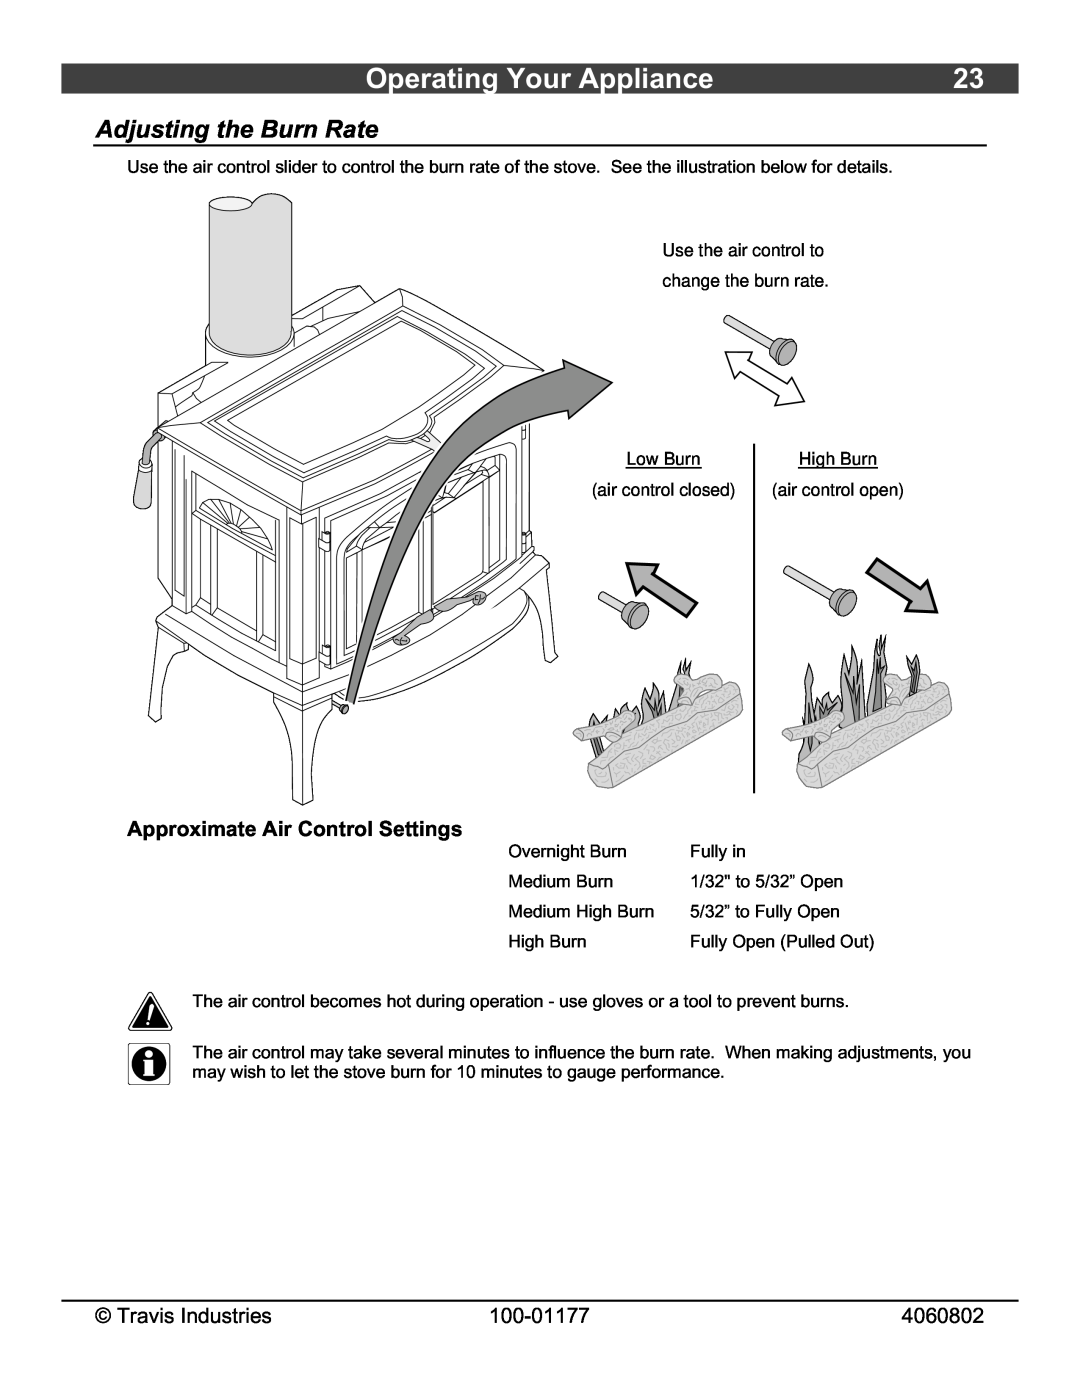 Lopi 028-S-75-2 owner manual Operating Your Appliance, Adjusting the Burn Rate, Approximate Air Control Settings 